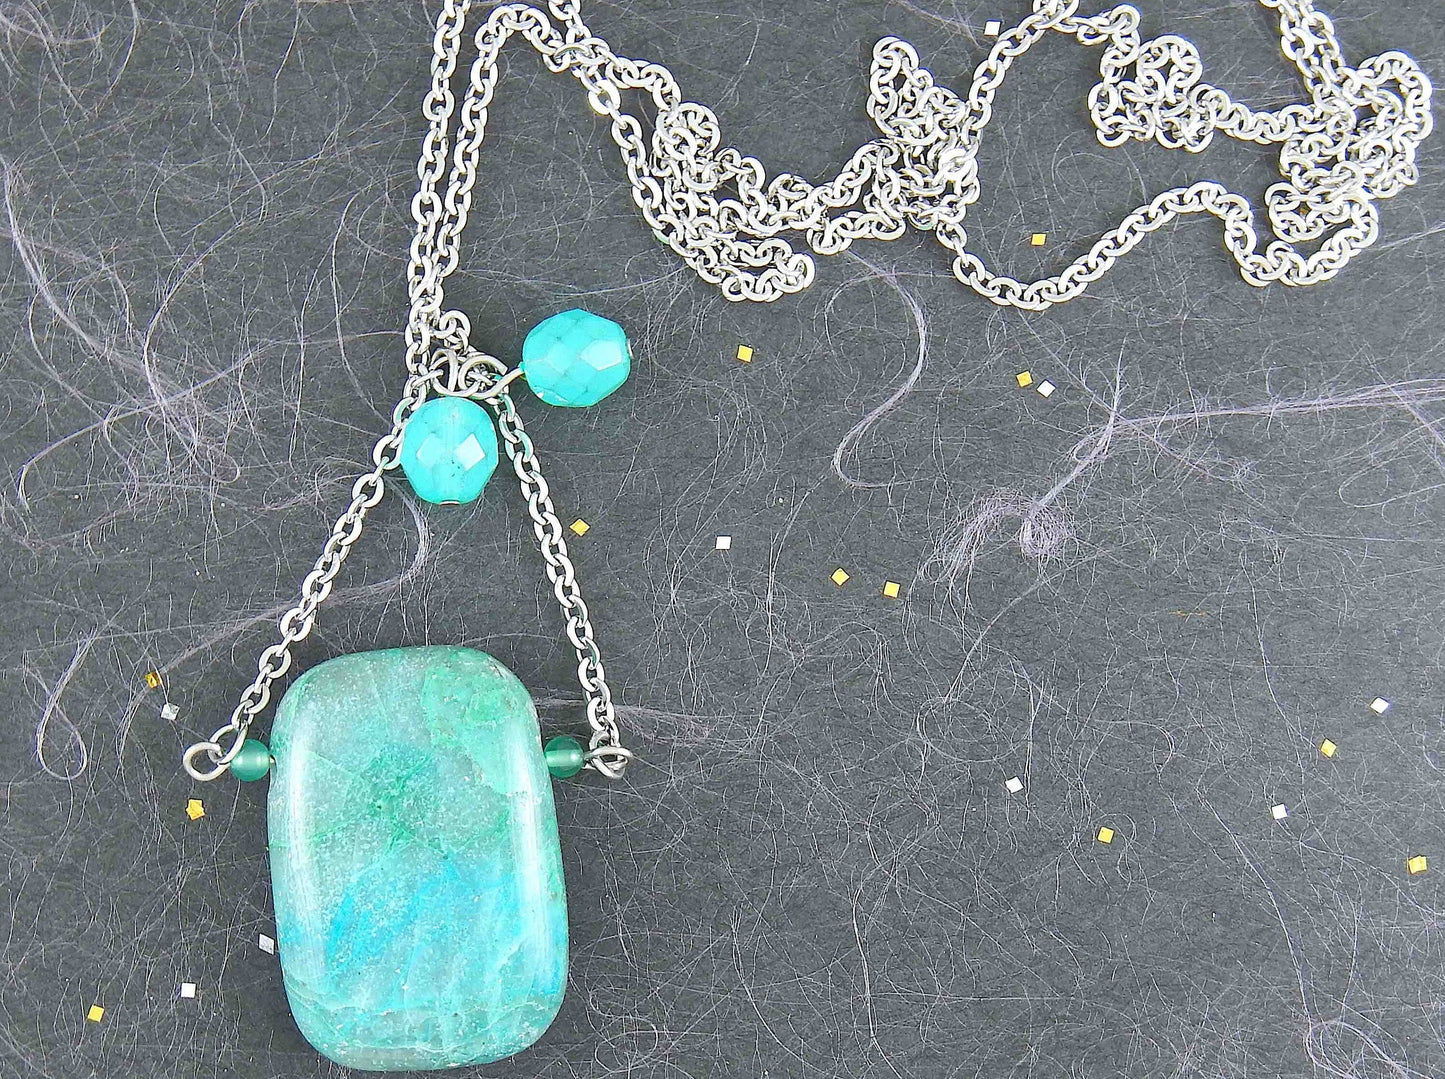 30-inch necklace with large rectangular blue-green chrysocolla stone pendant, triangular layout, matching glass beads, stainless steel chain